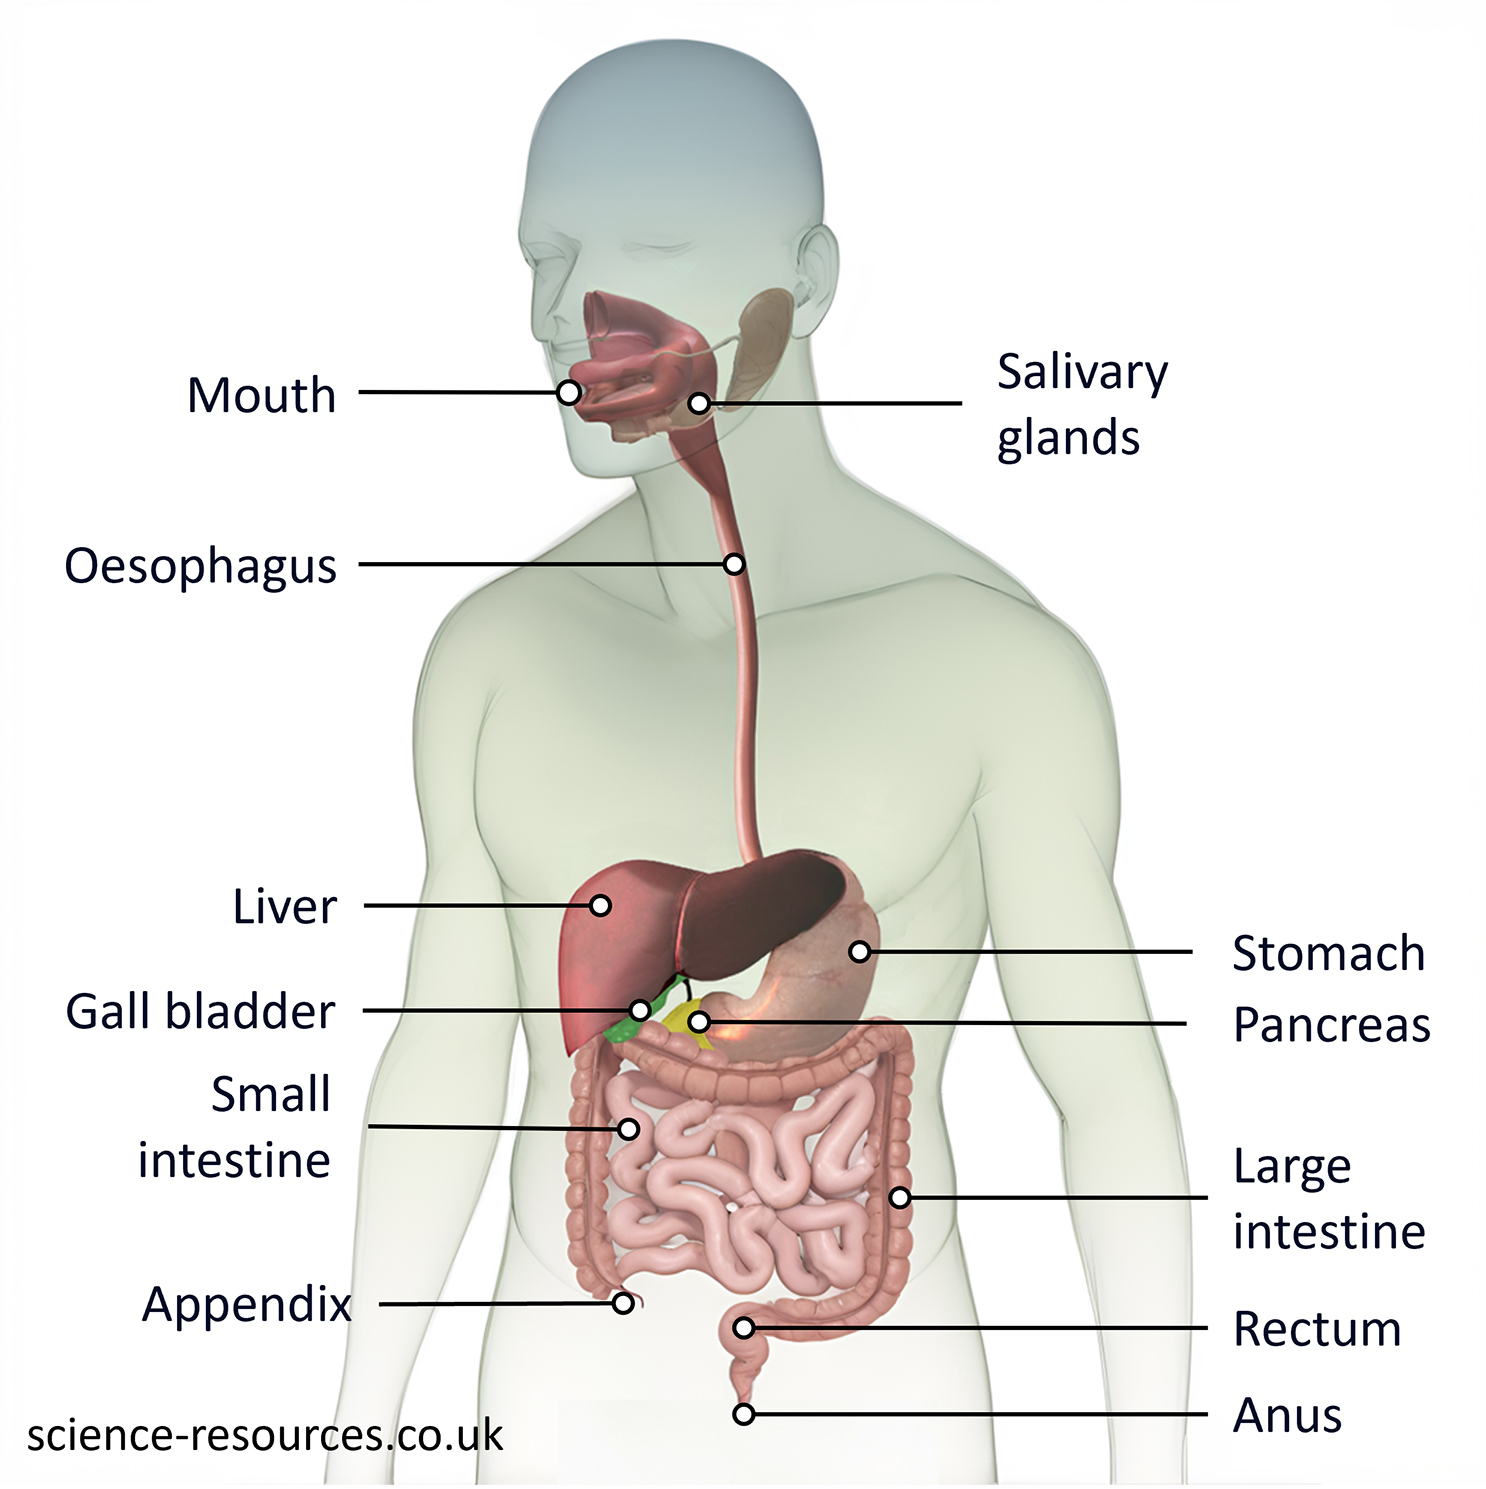 Diagram showing the parts of the digestive system